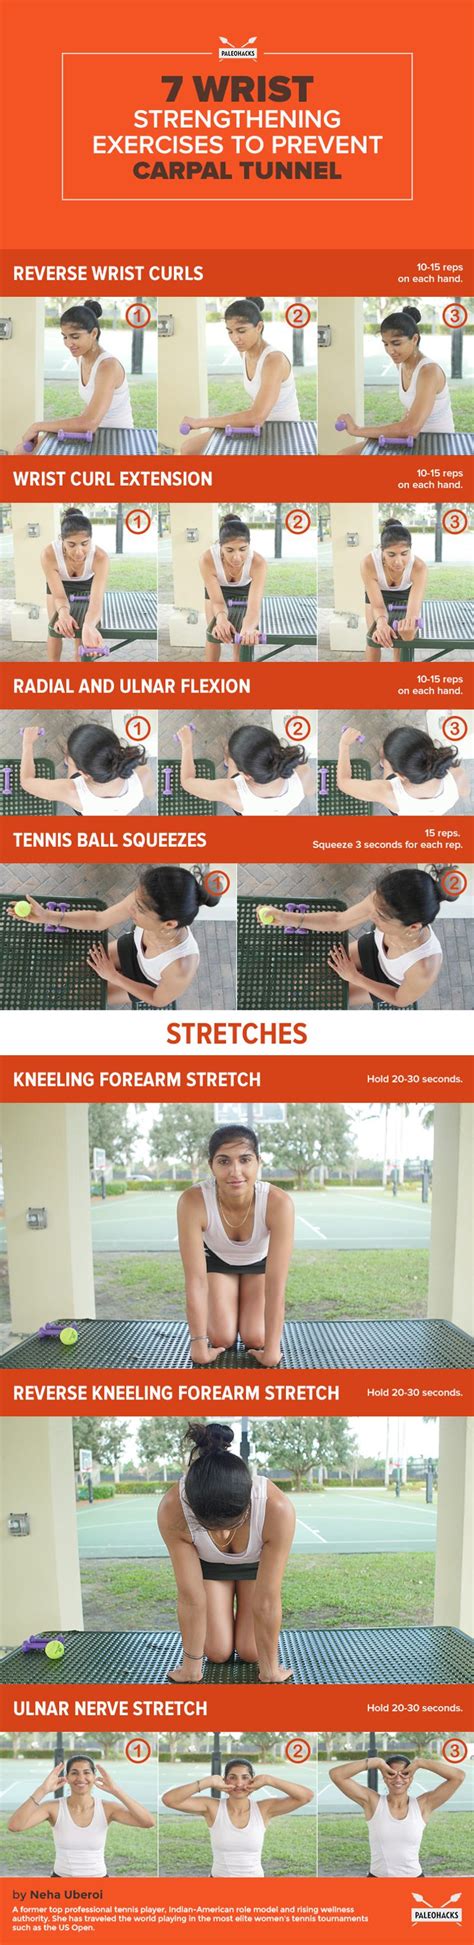 7 Wrist Exercises And Stretches To Prevent Carpal Tunnel Carpal